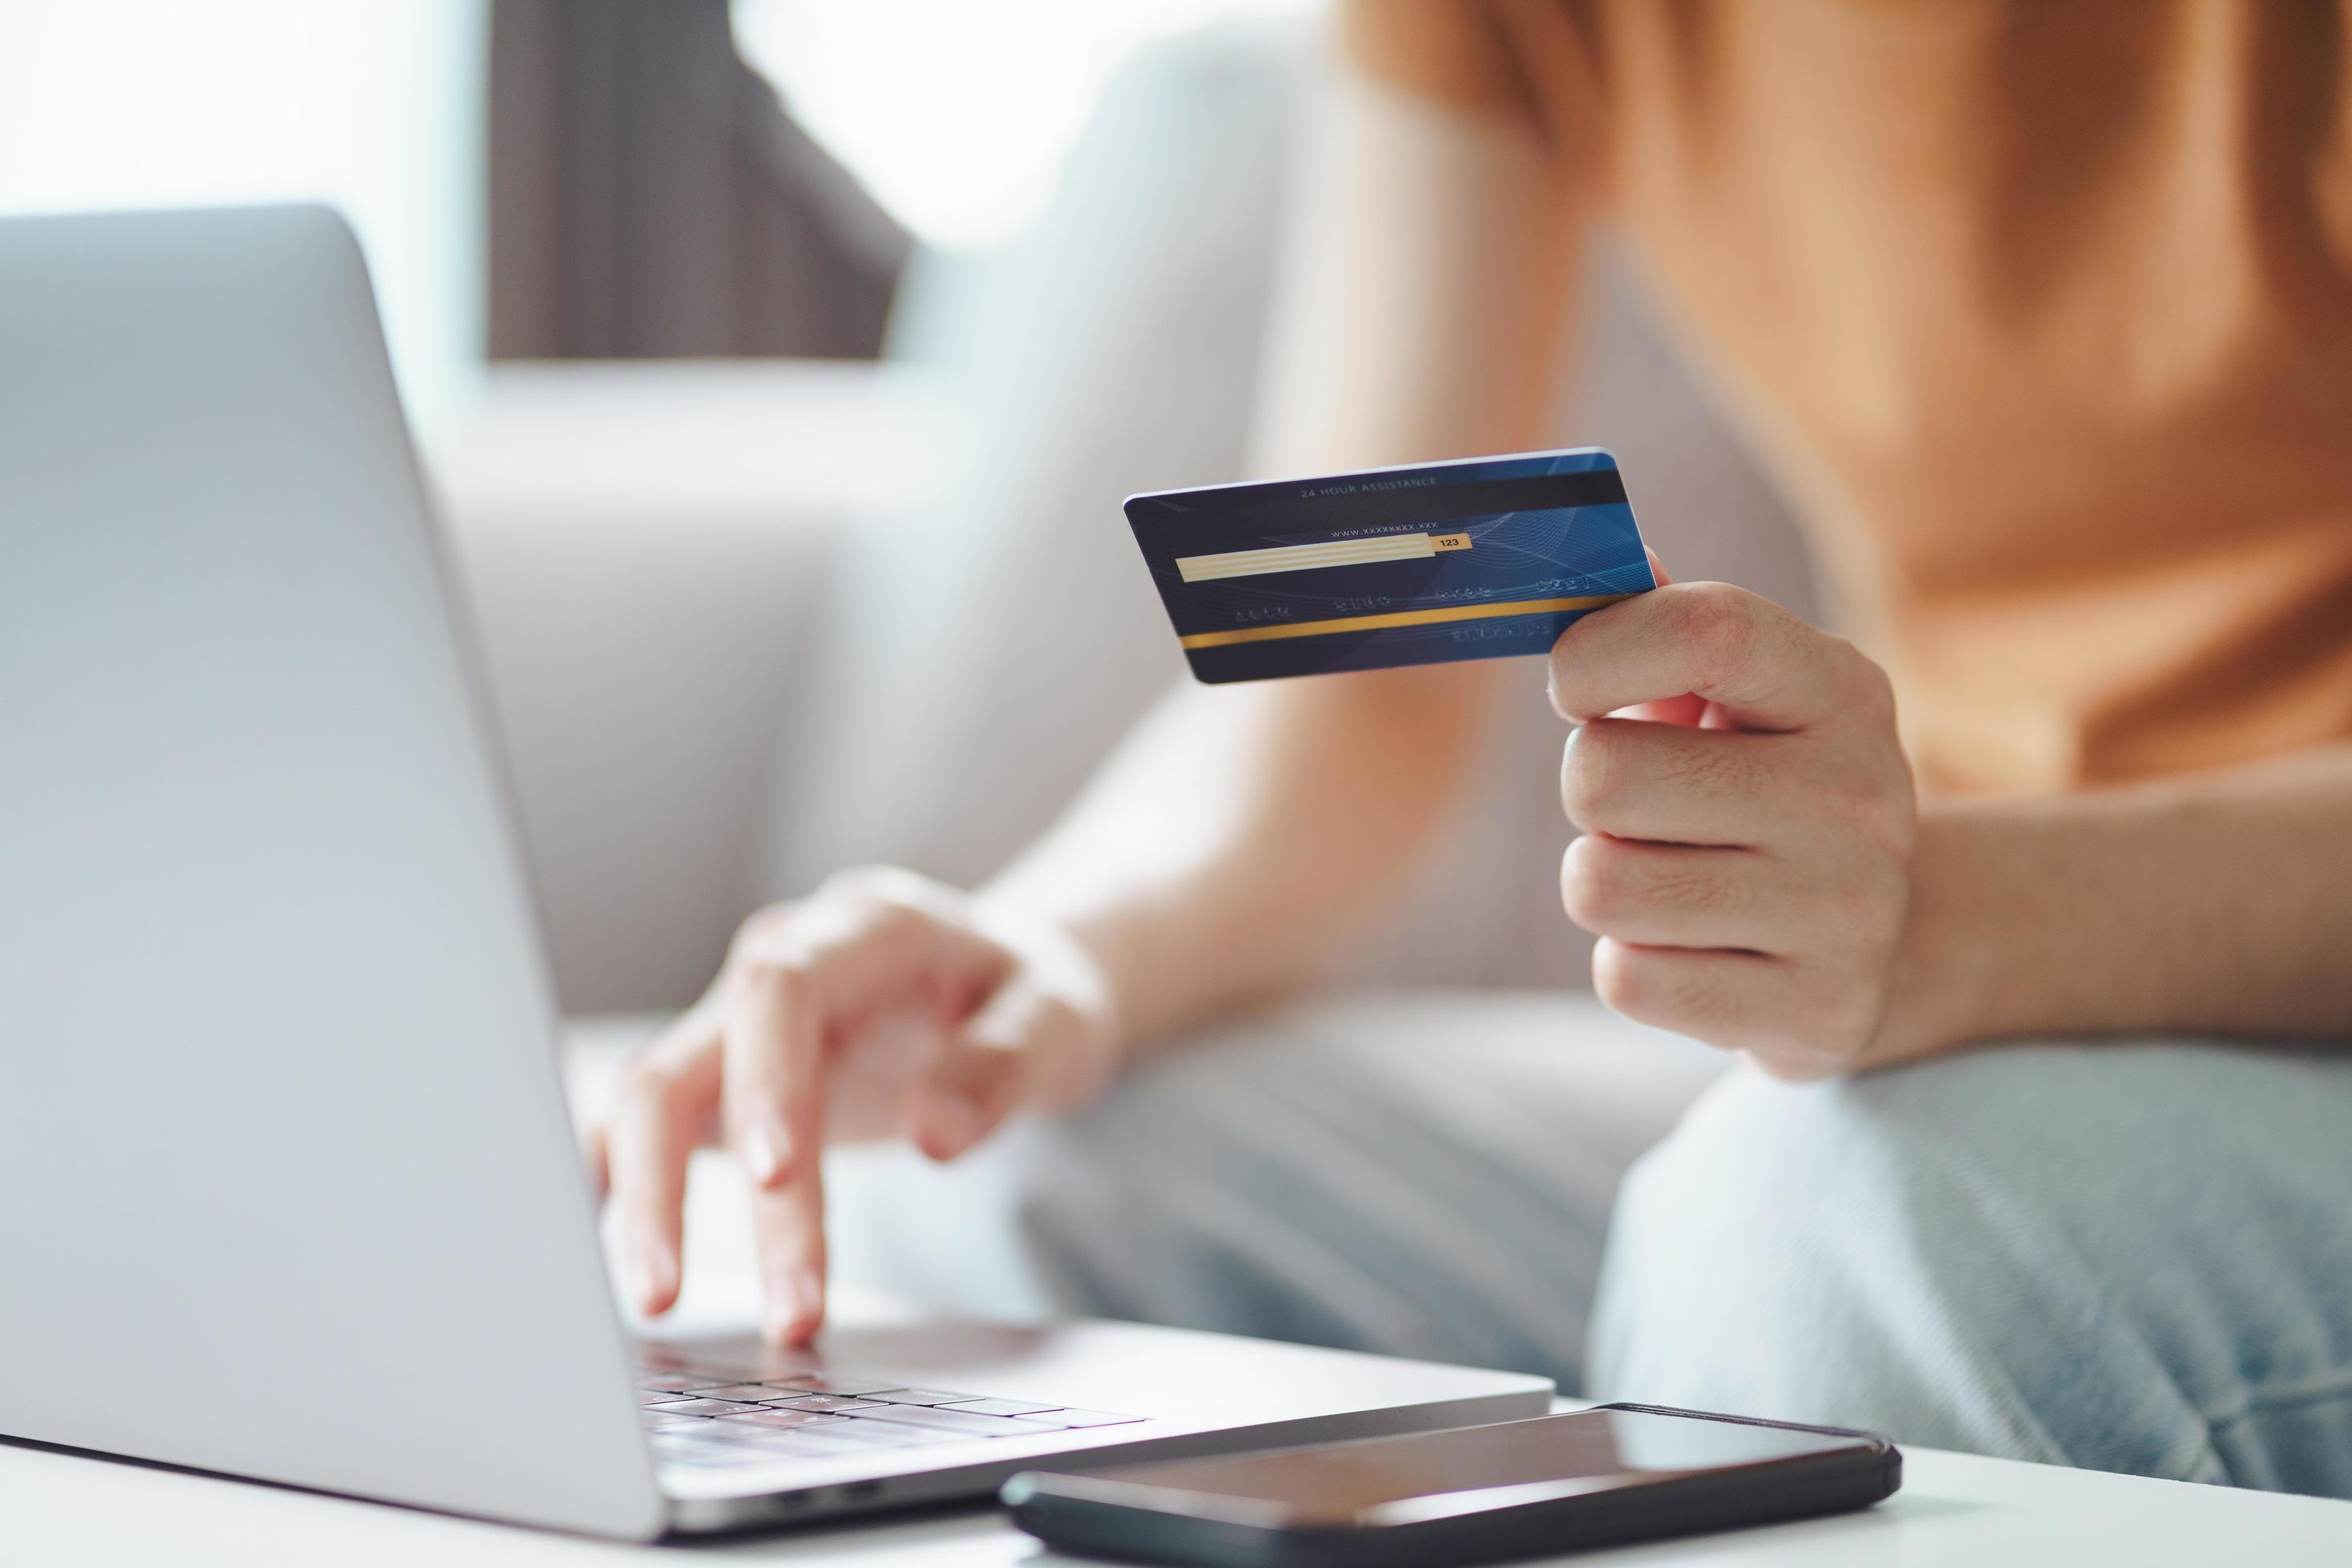 How To See Your Credit Card Number On Google Chrome